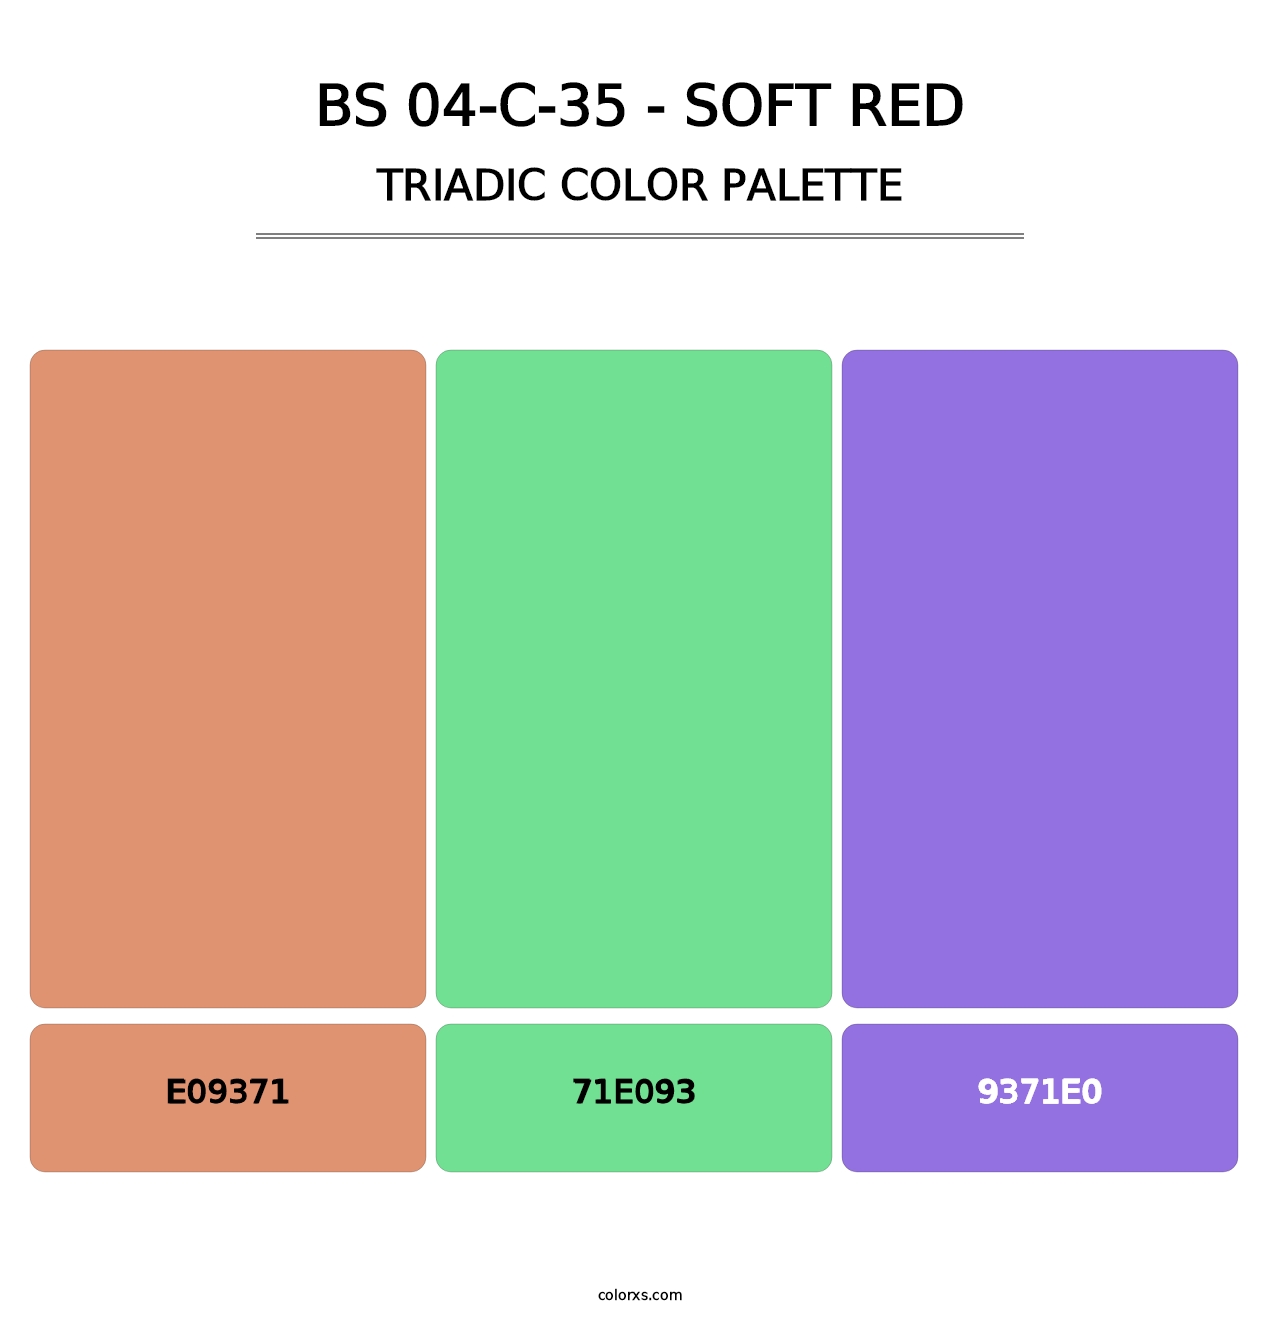 BS 04-C-35 - Soft Red - Triadic Color Palette